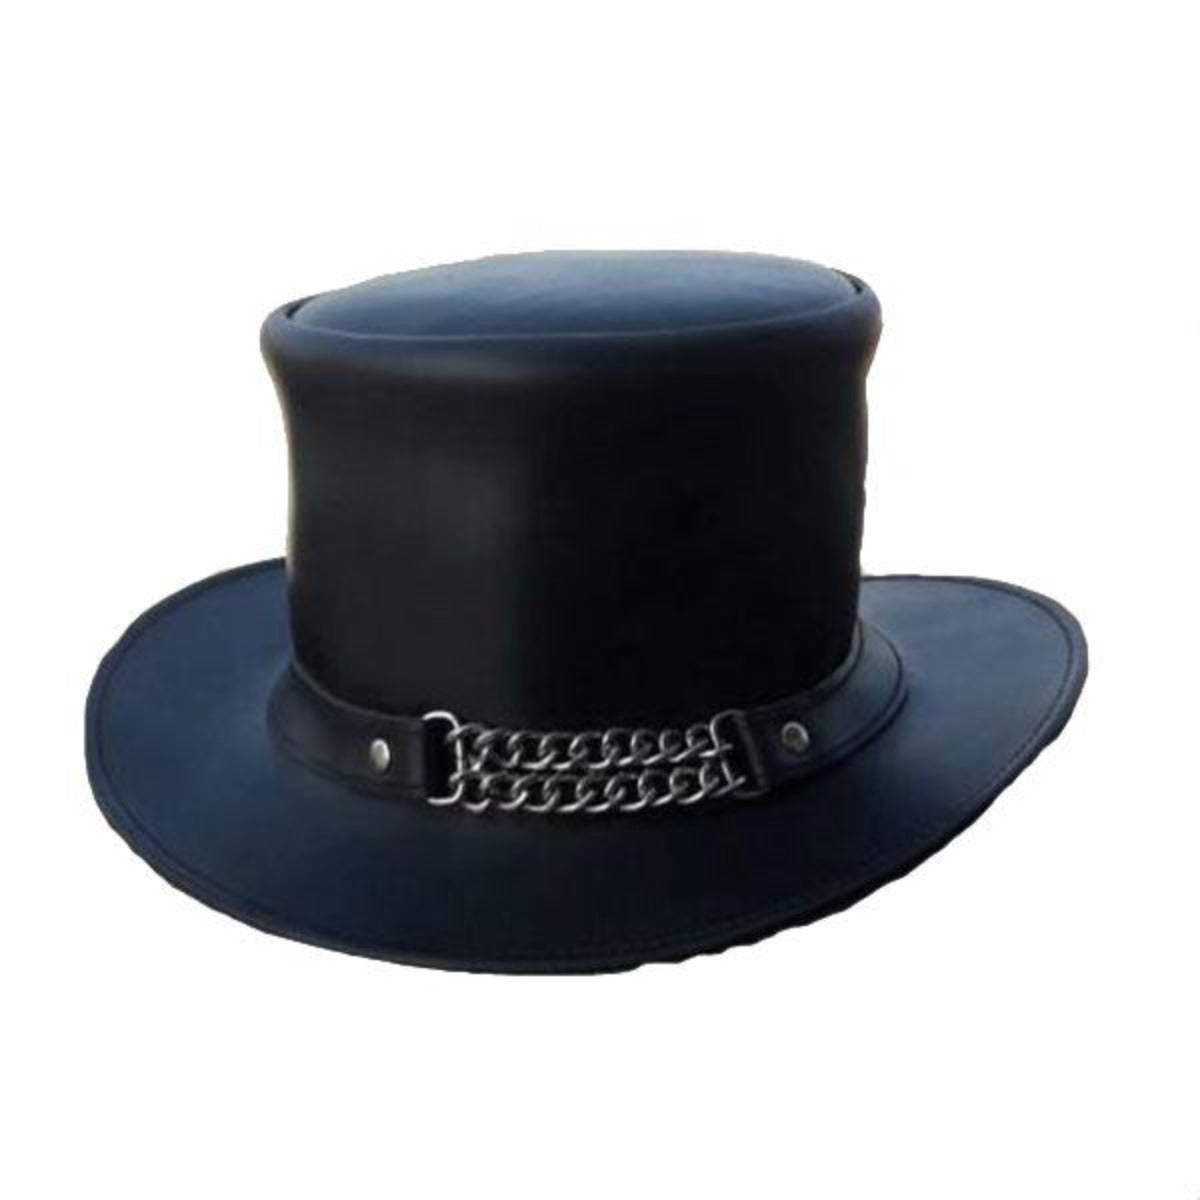 Vance Leather Steampunk Chain Reaction Leather Top Hat